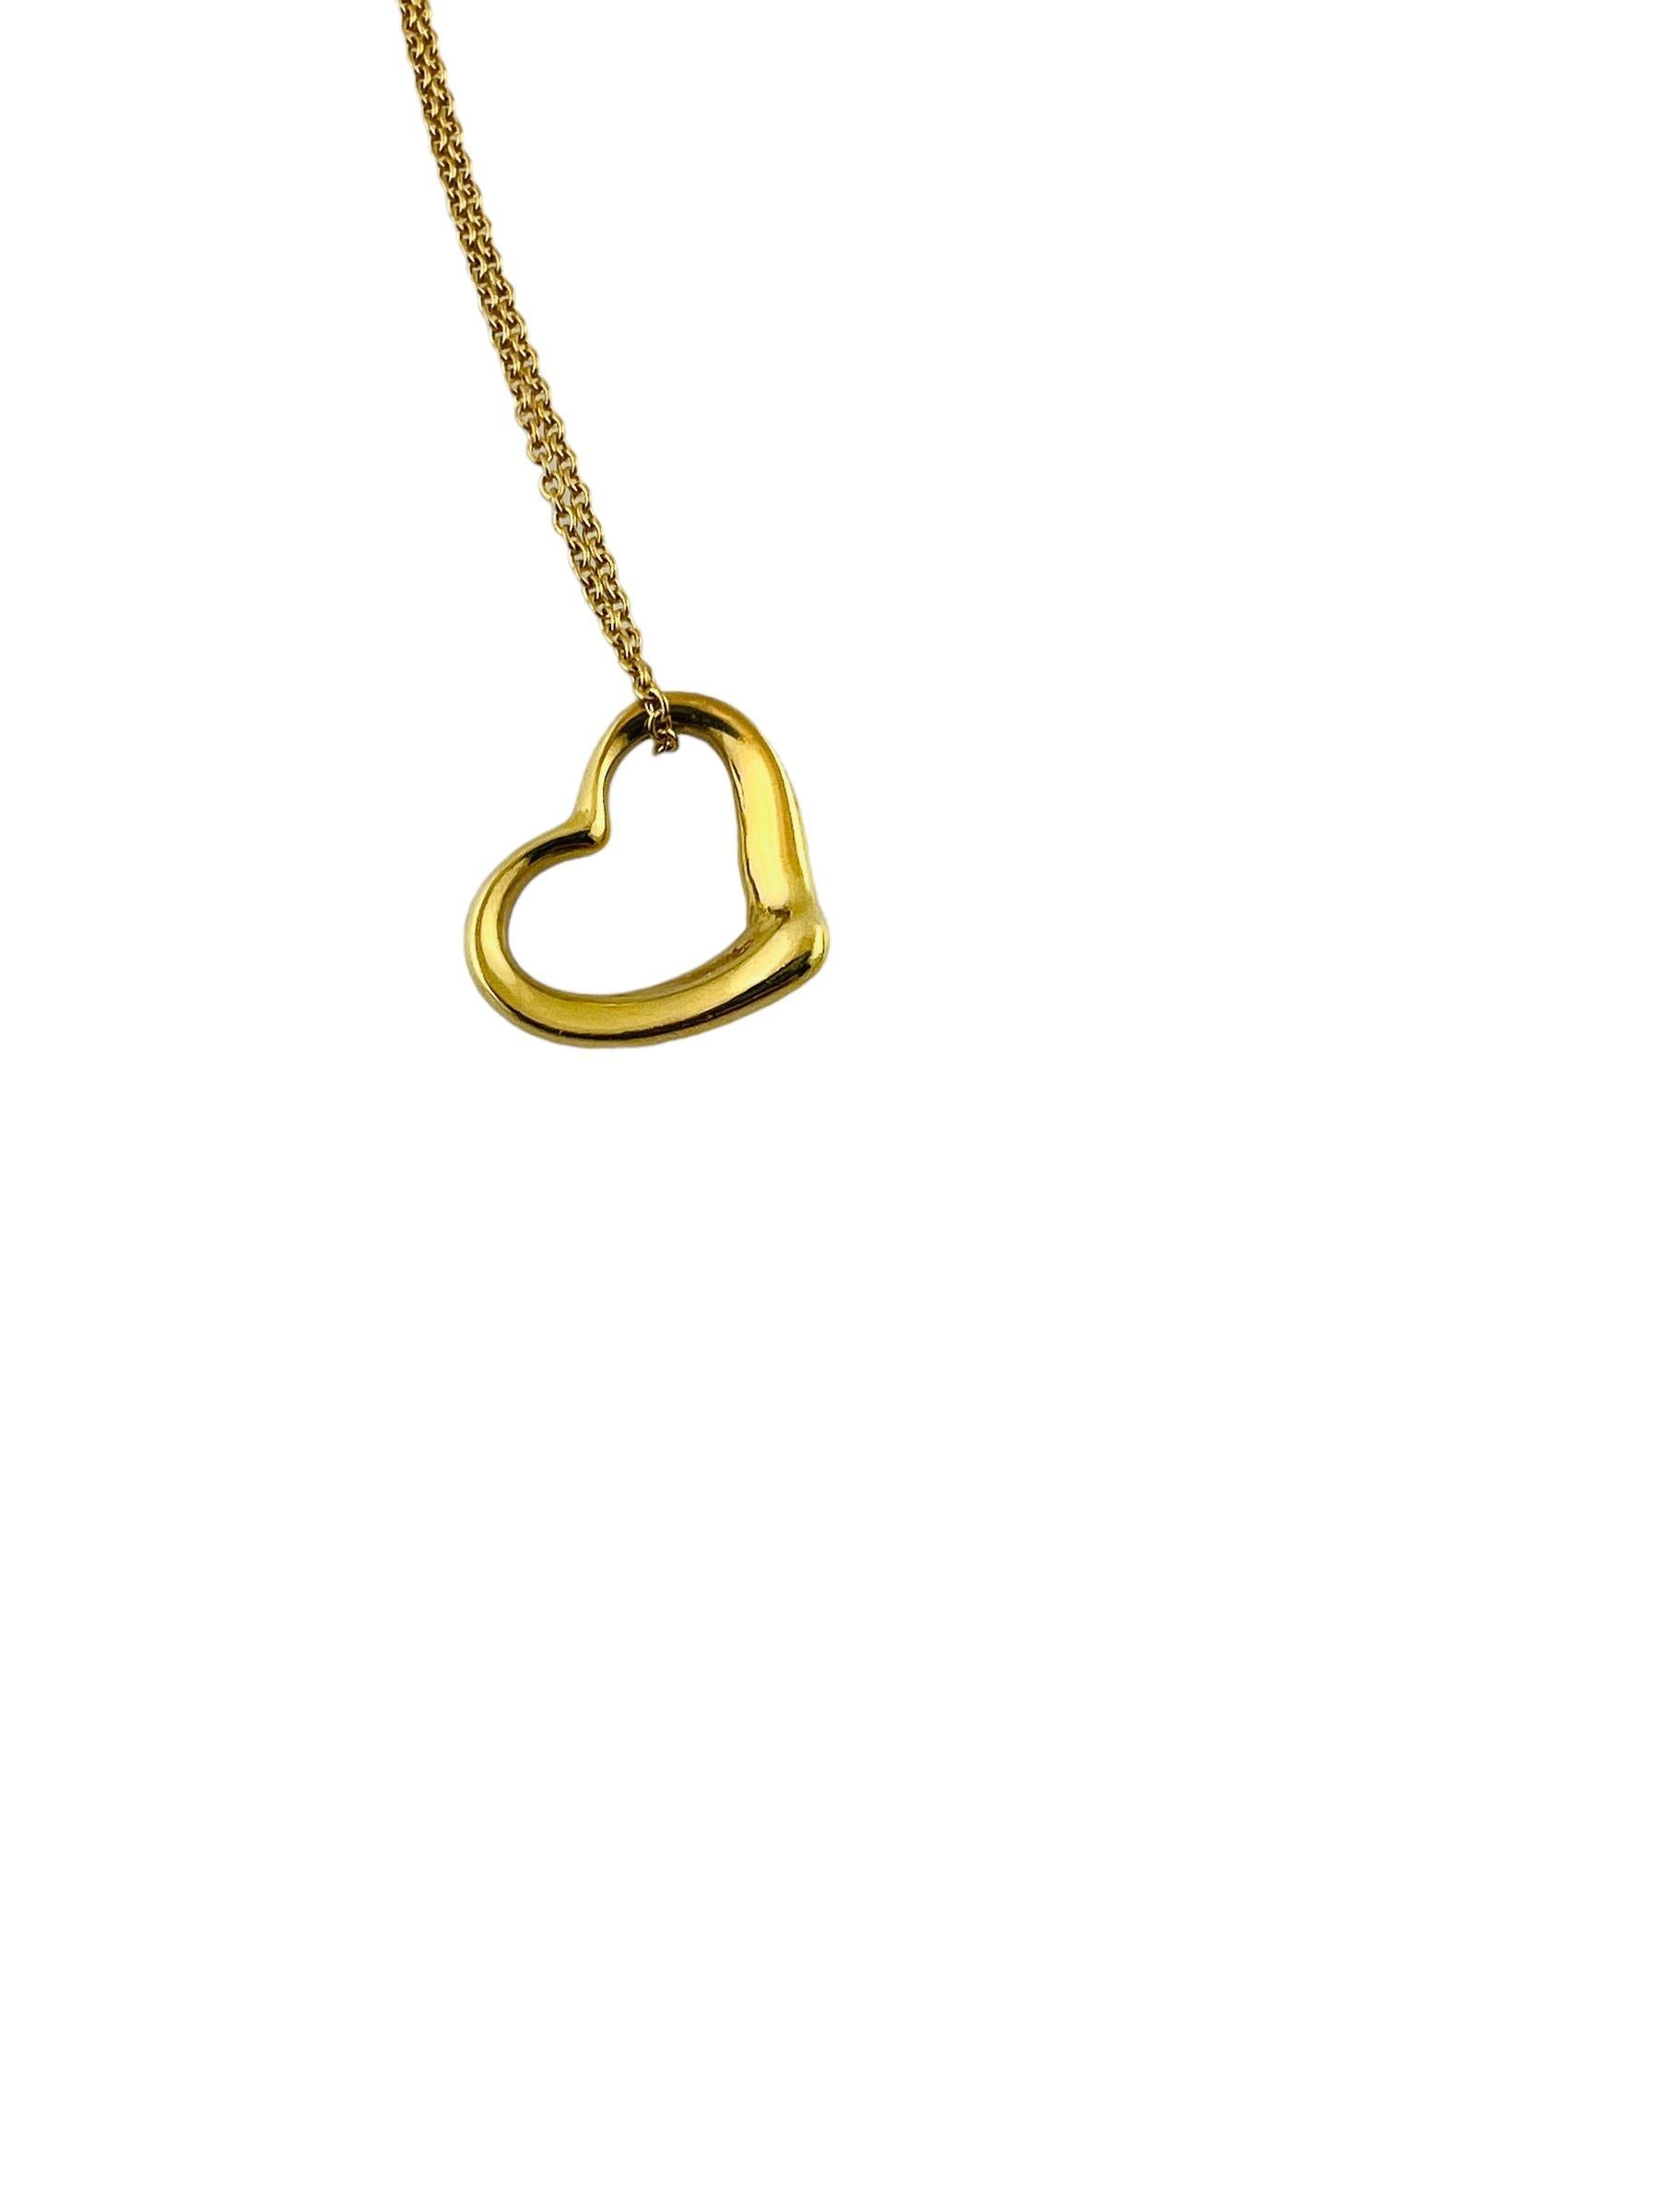 Tiffany & Co. Elsa Peretti 18K Yellow Gold Open Heart Pendant Necklace #15424 In Good Condition In Washington Depot, CT